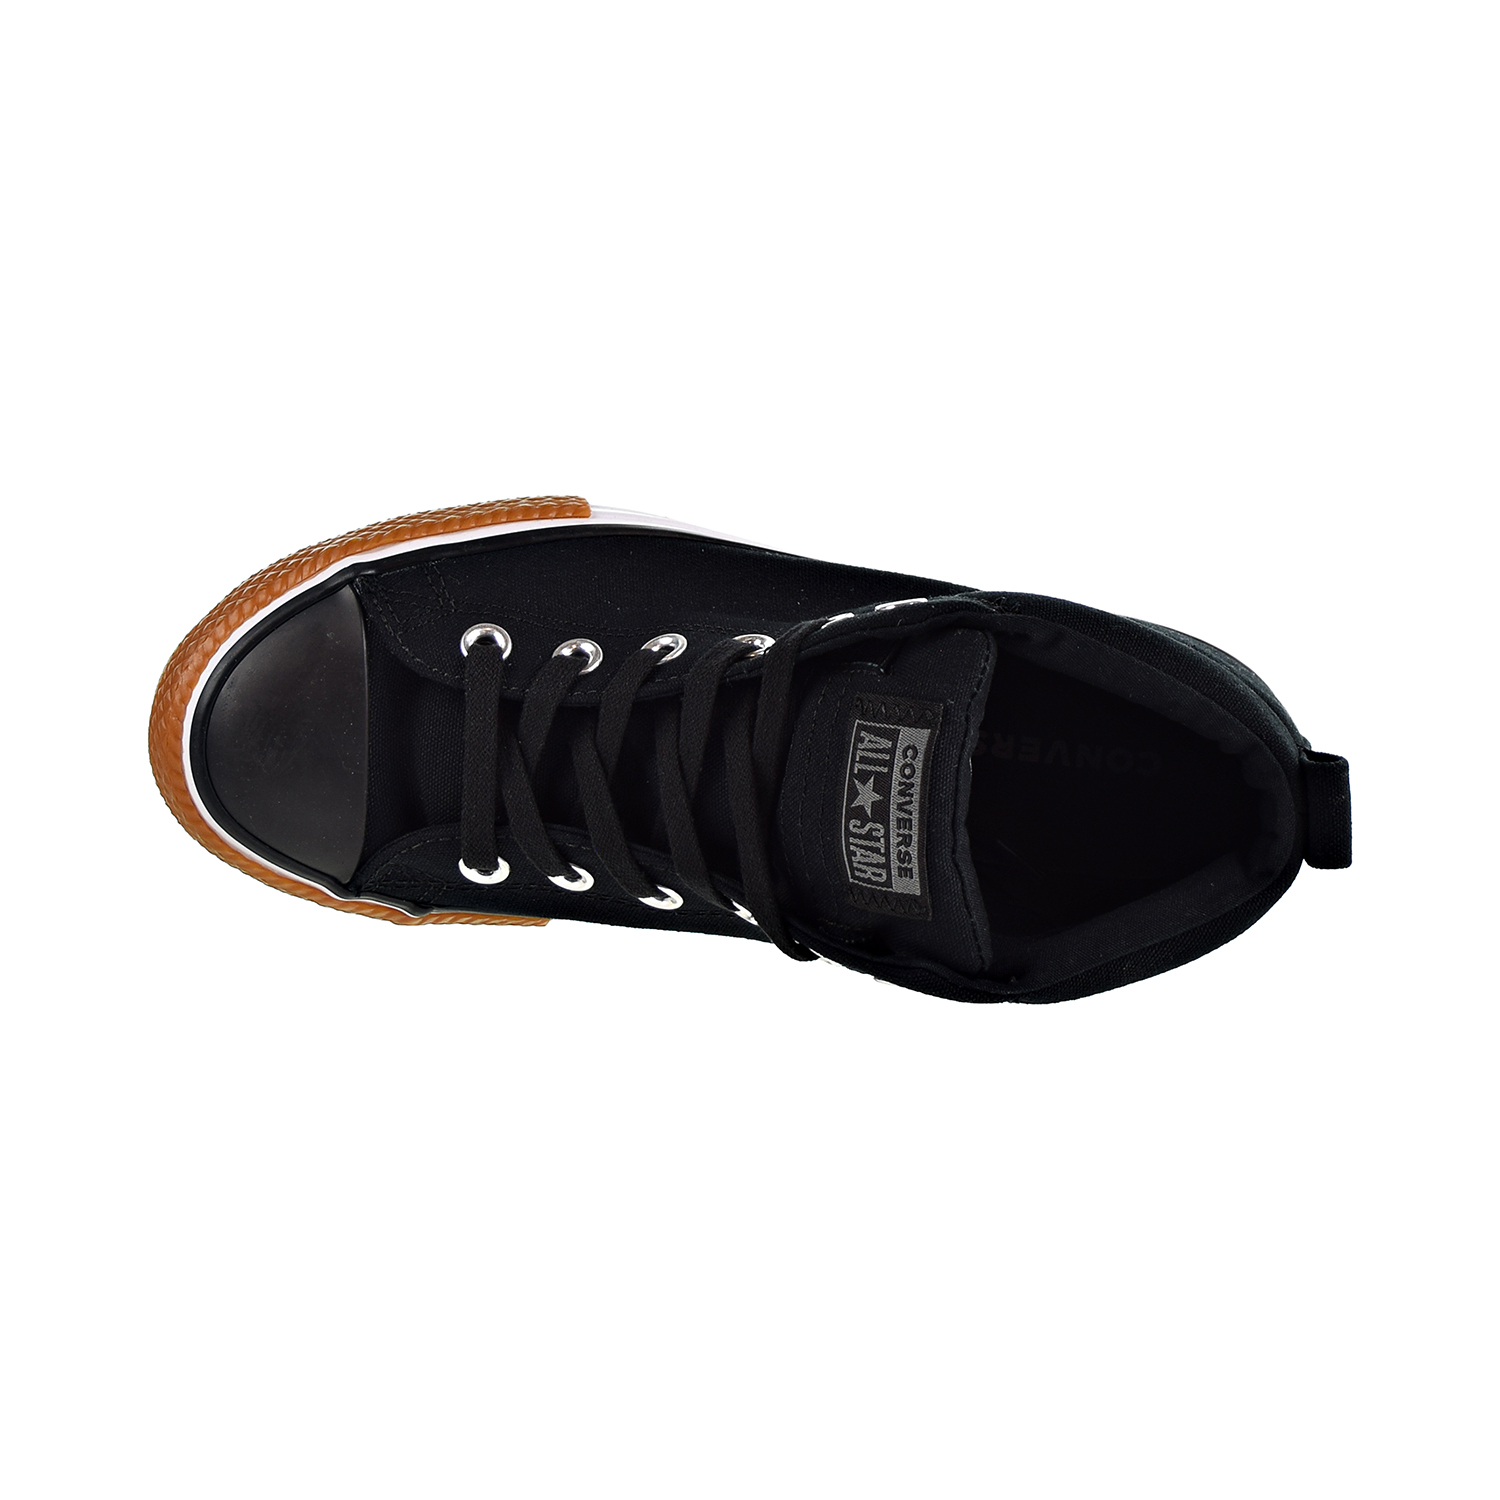 Converse Chuck Taylor All Star Street Mid Kids Shoes Black/Black/White 661908f - image 5 of 6